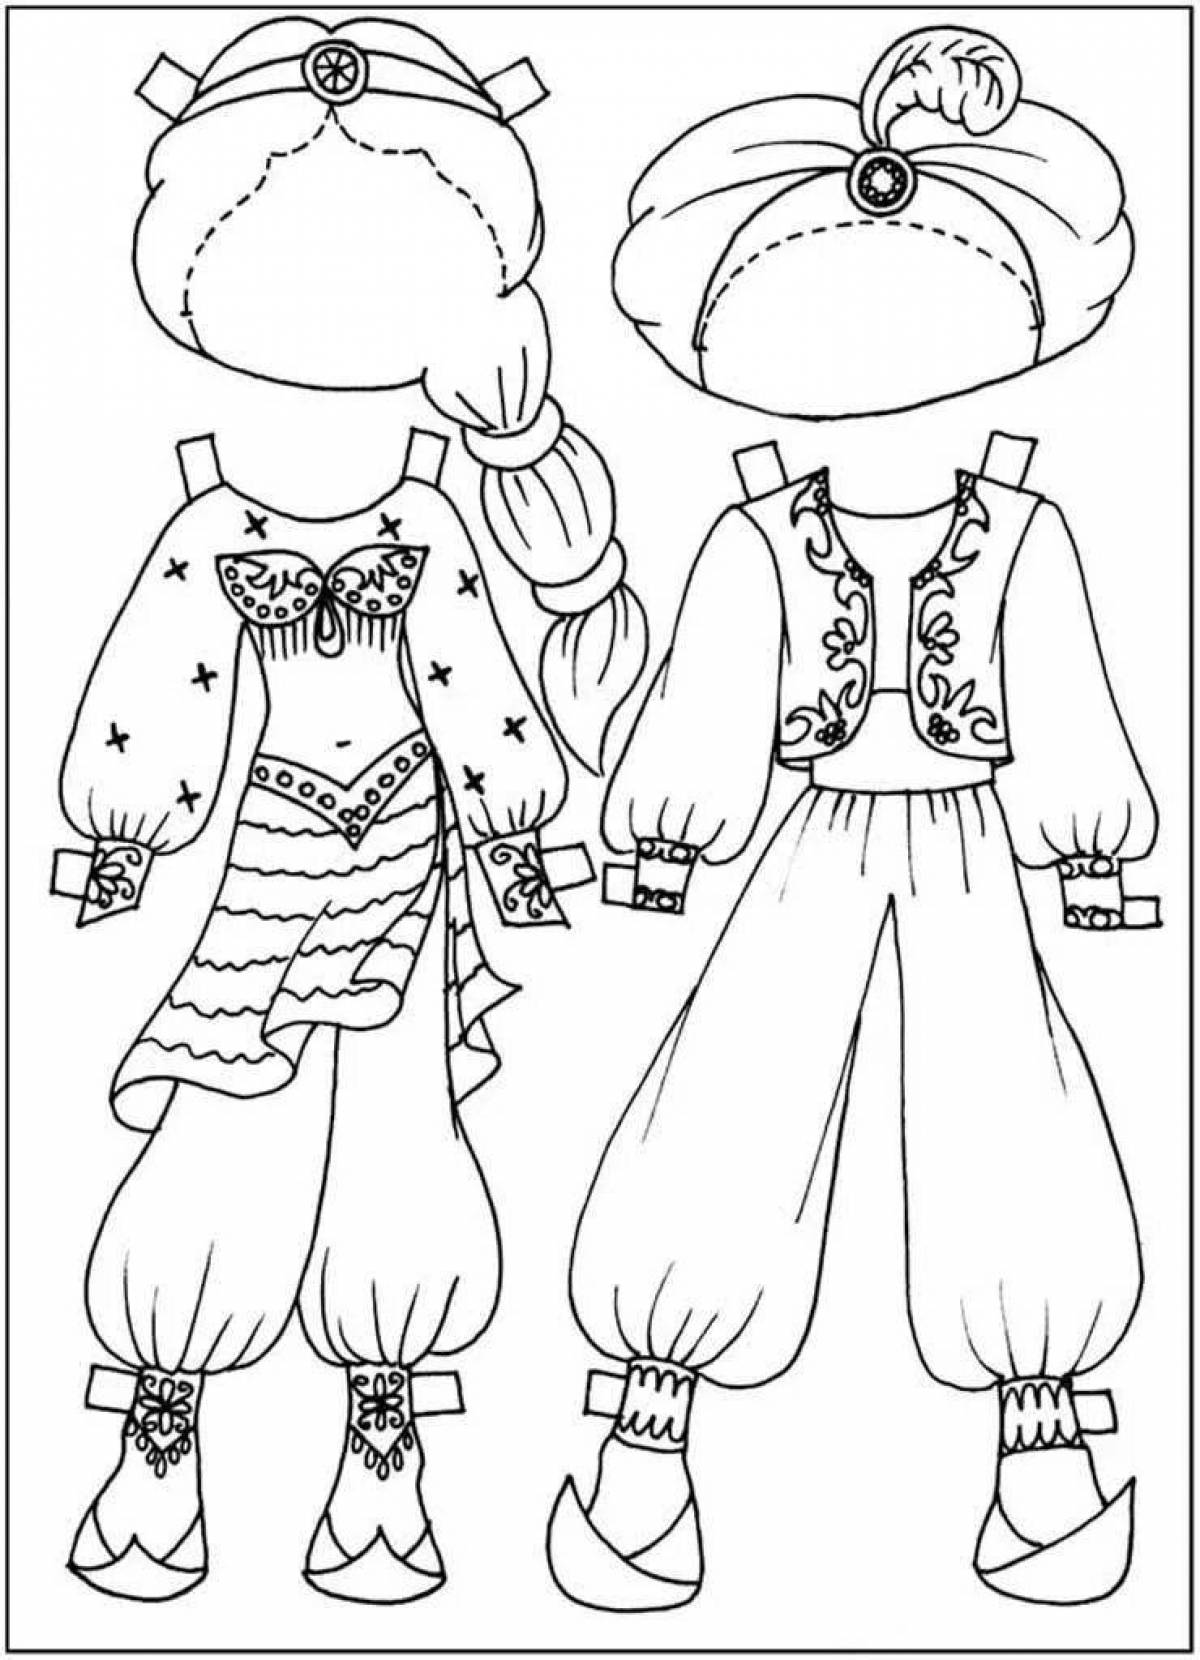 Fancy costume coloring pages for kids